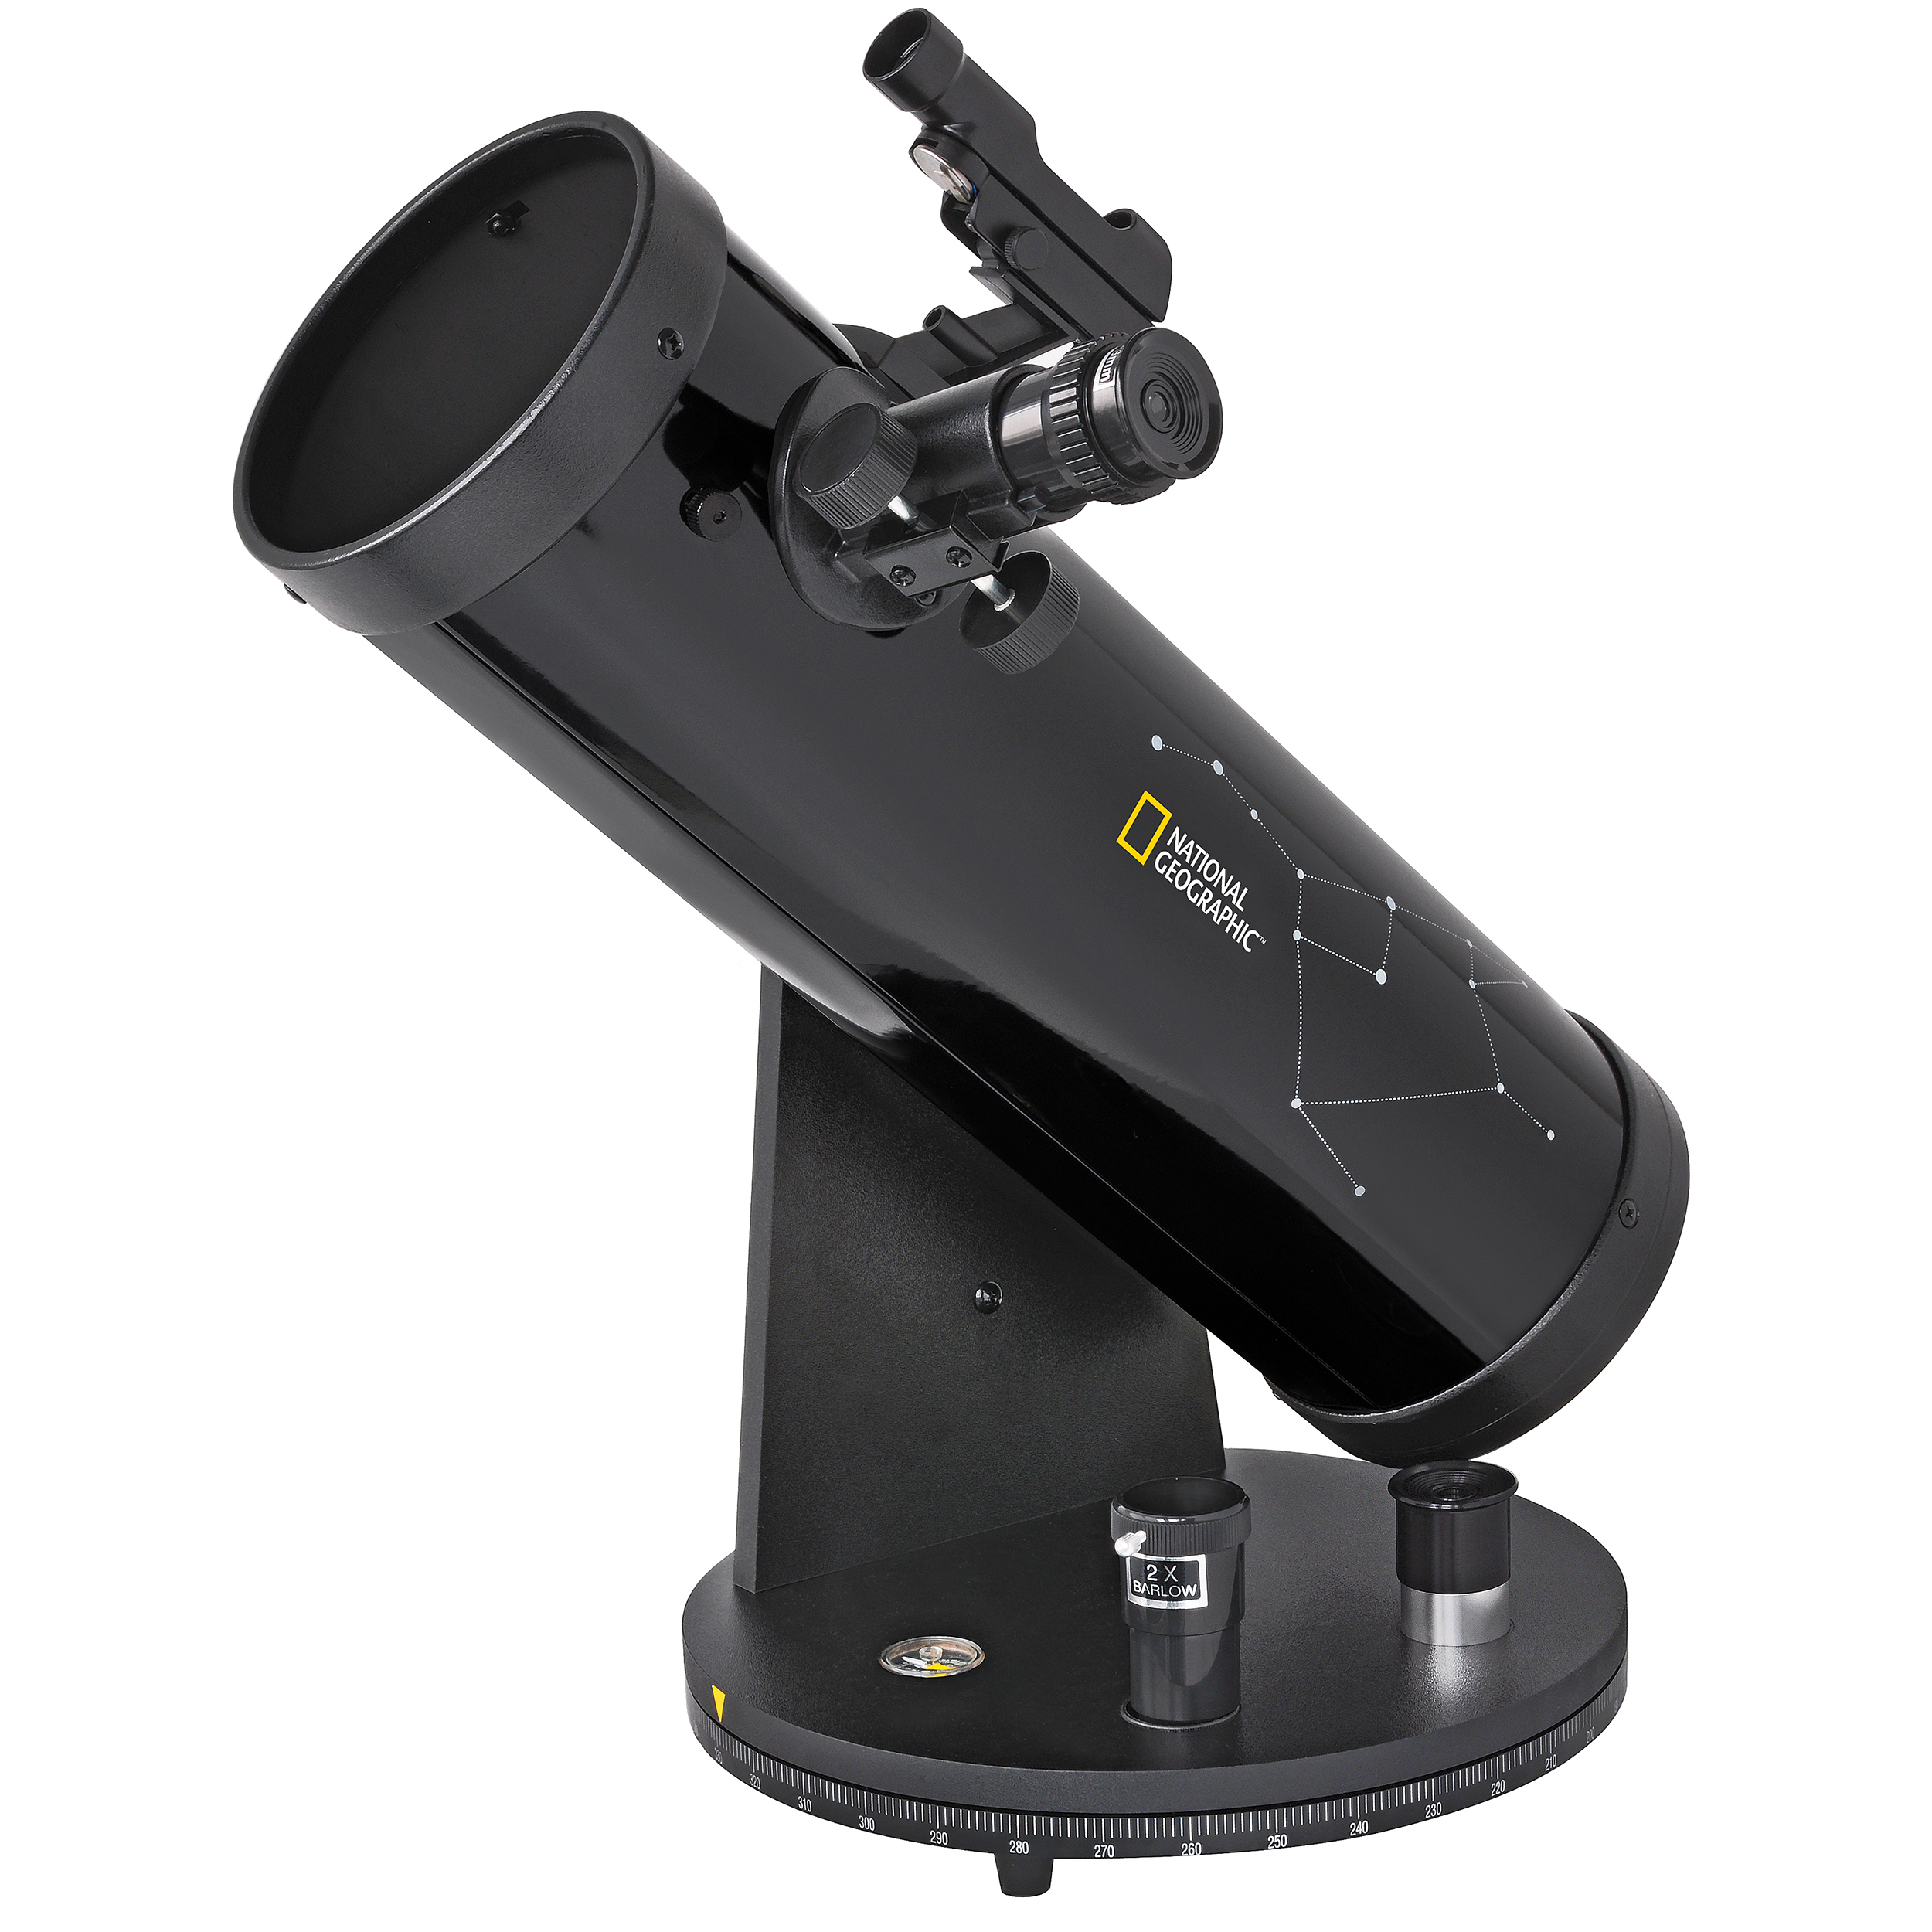 NATIONAL GEOGRAPHIC 114/500 Télescope compact